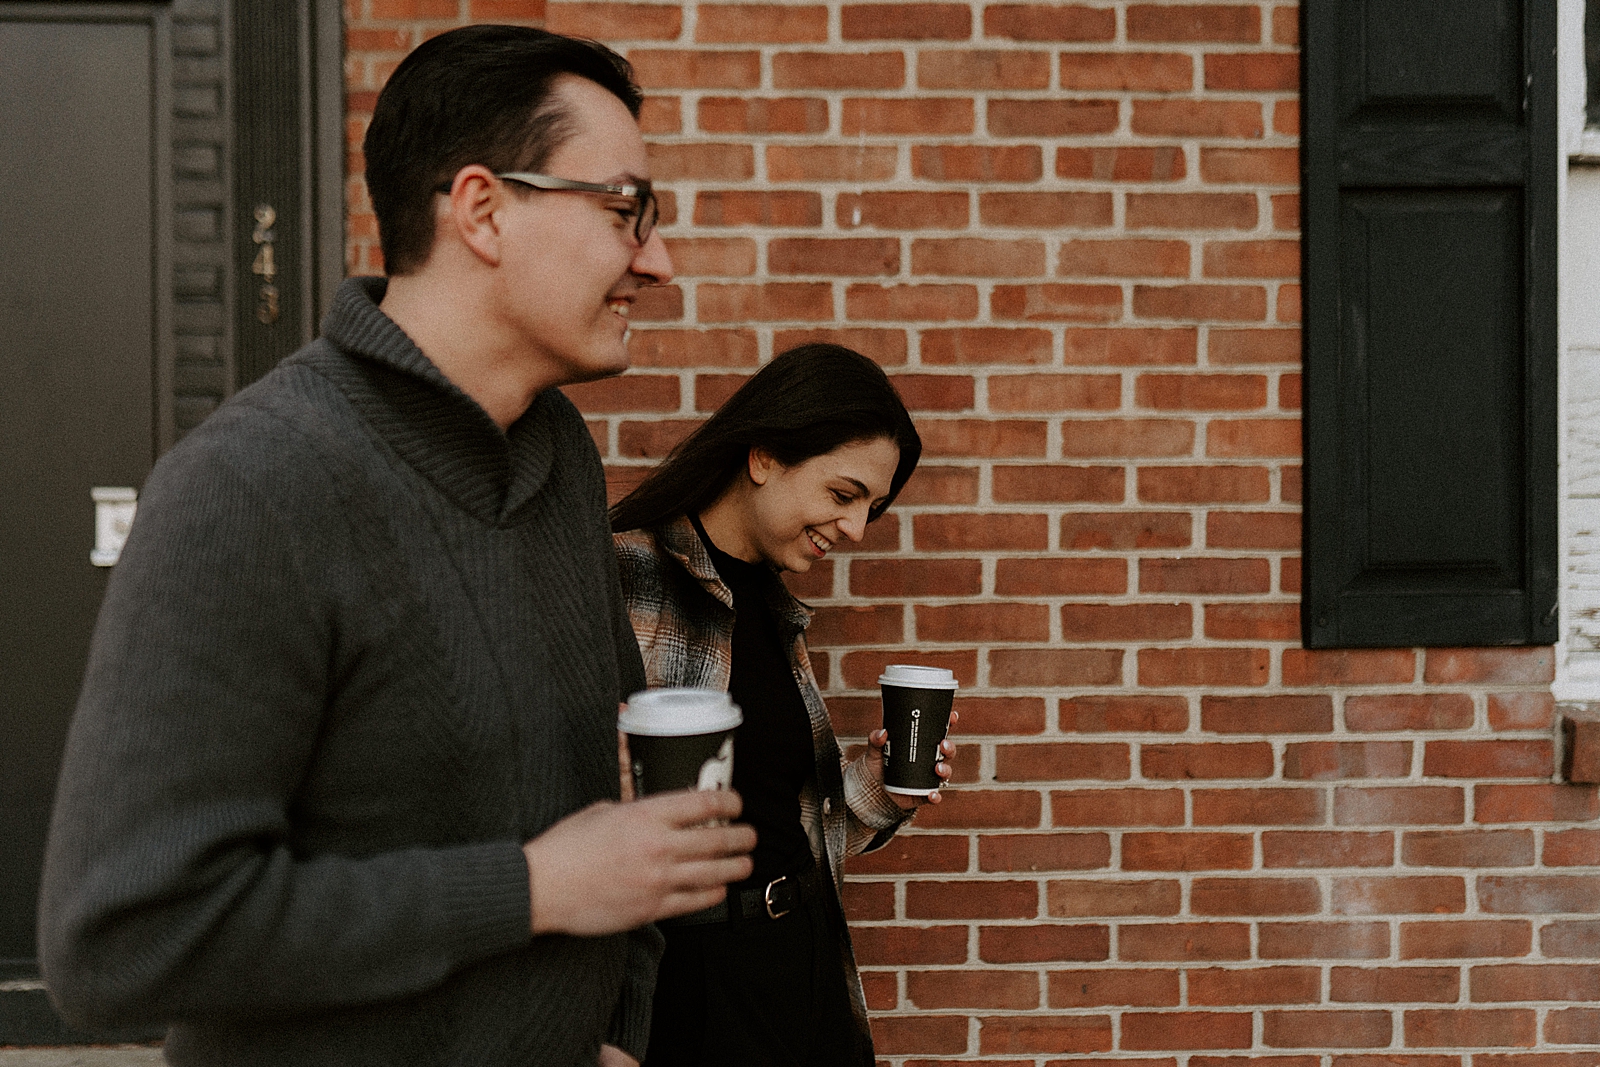 Couple looking at each other next to red brick building and holding coffees